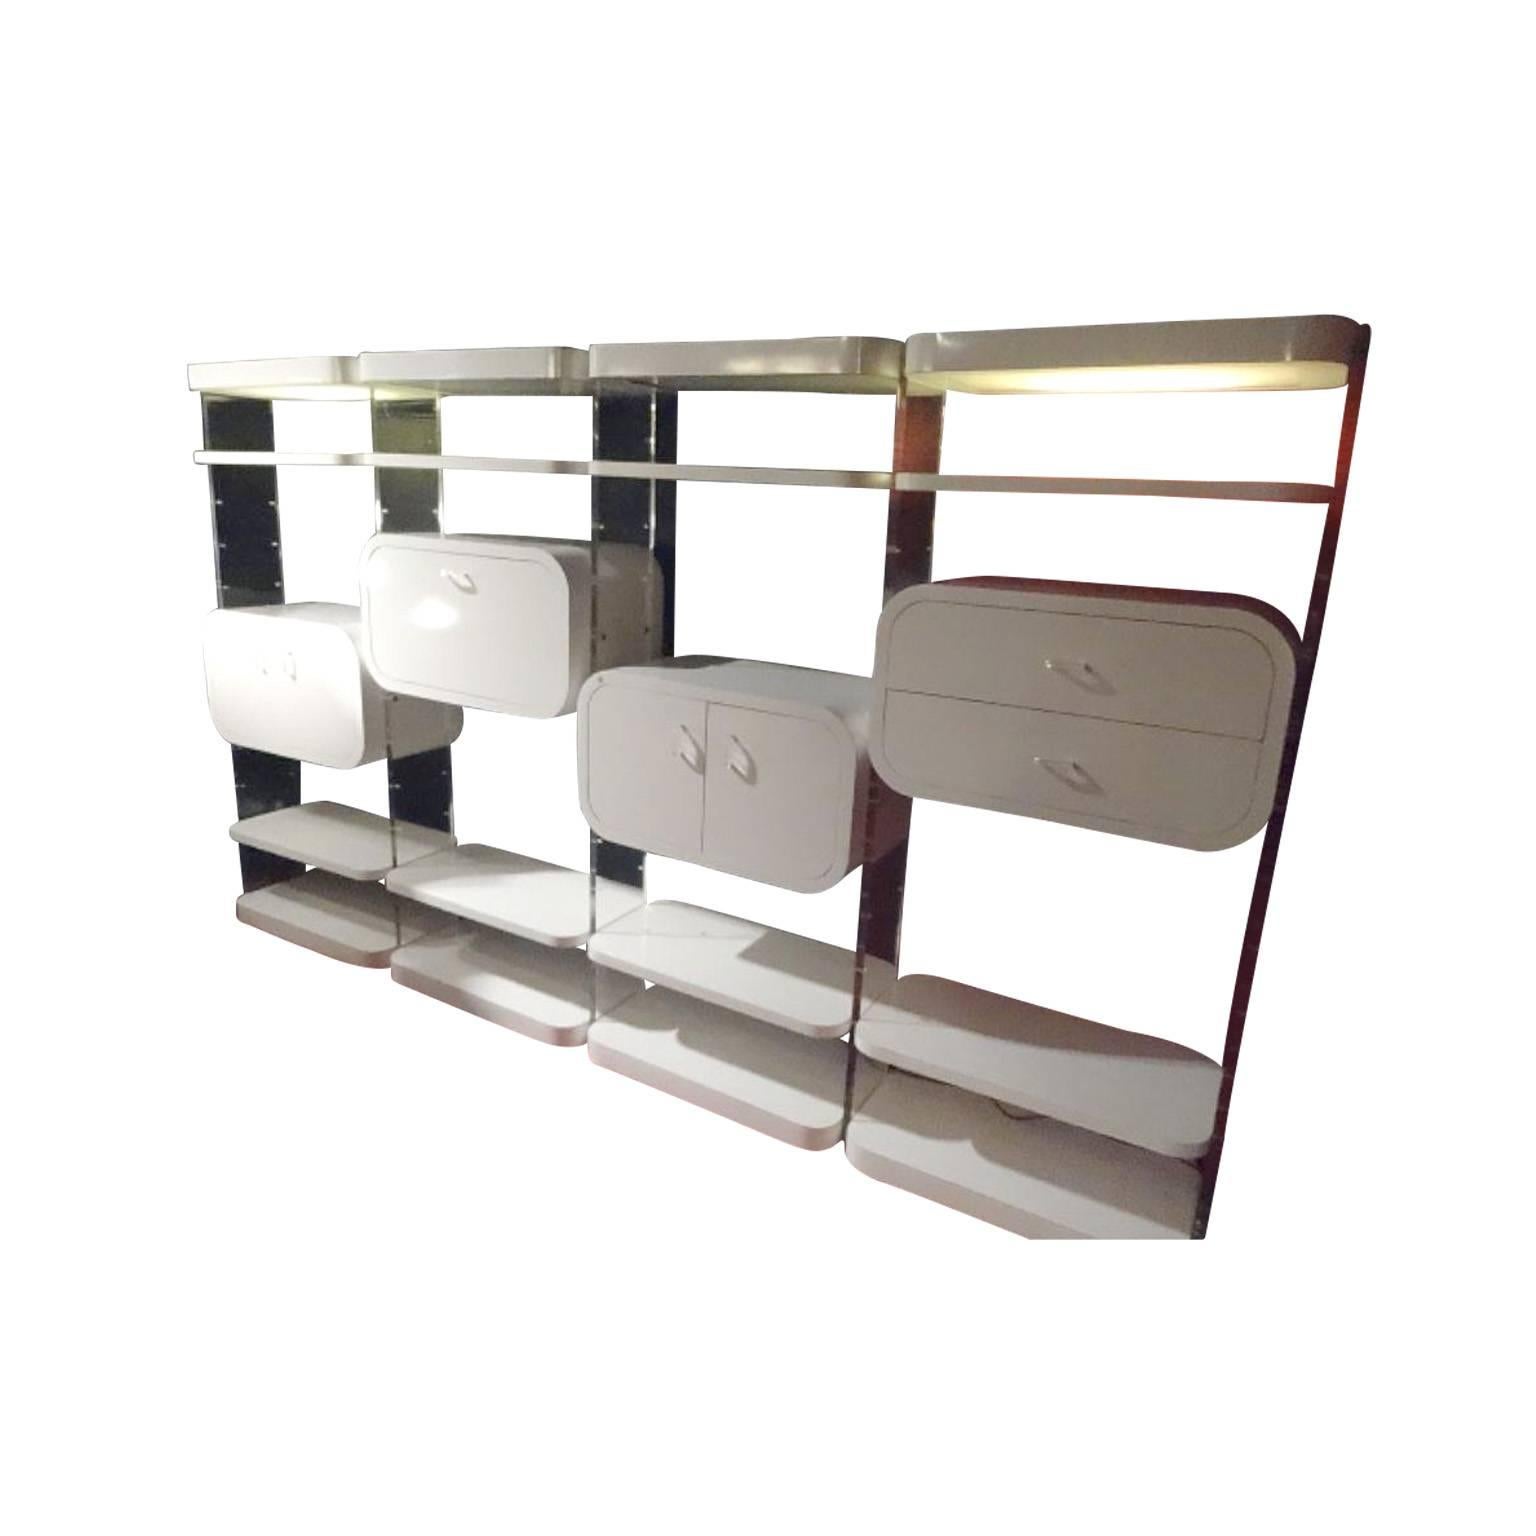 Pierre Cardin Lucite and Lacquer Illuminated Wall Unit, circa 1970s In Good Condition In New York, NY